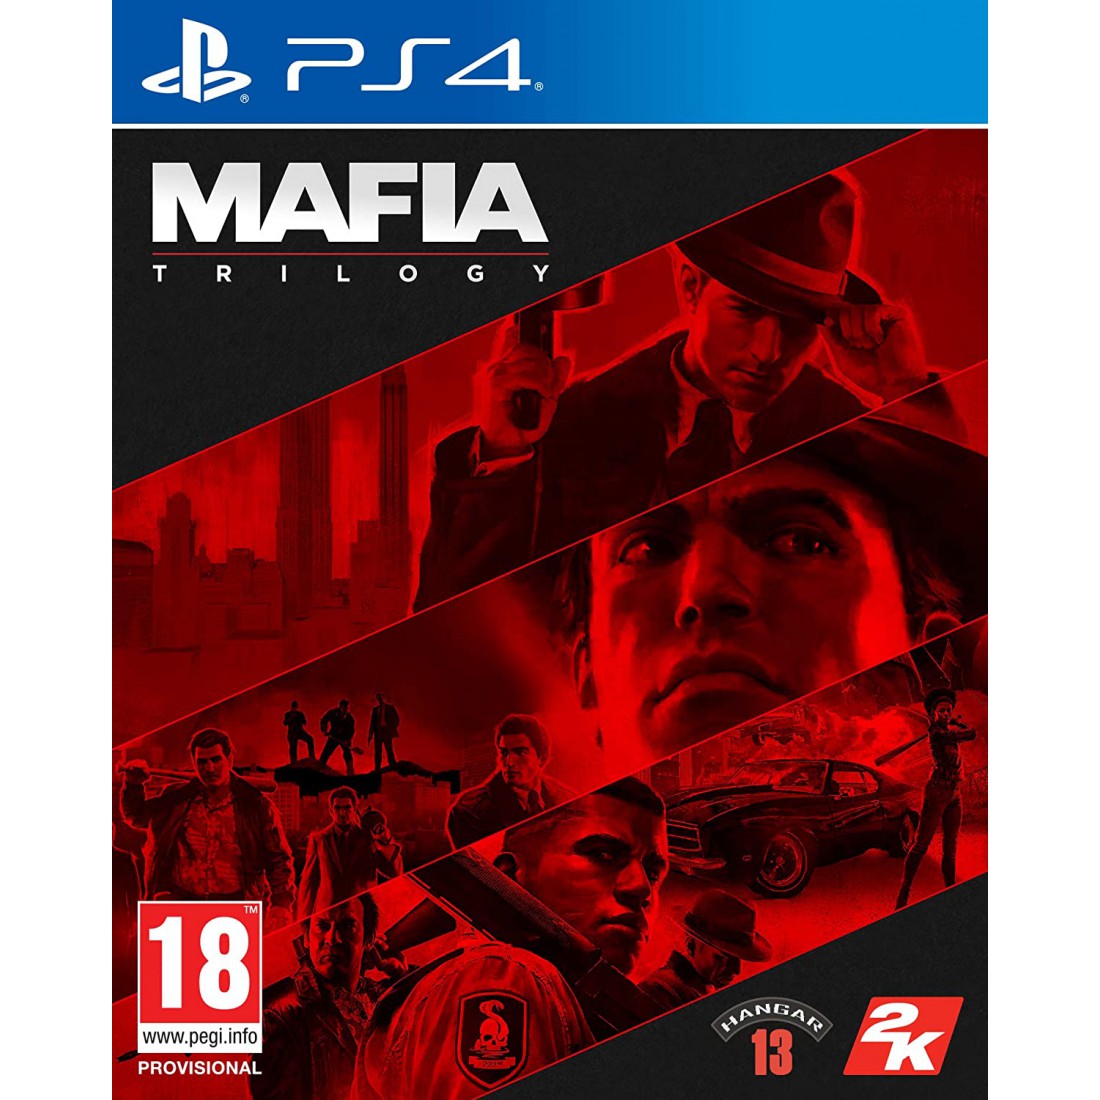 will there be a mafia 4 game